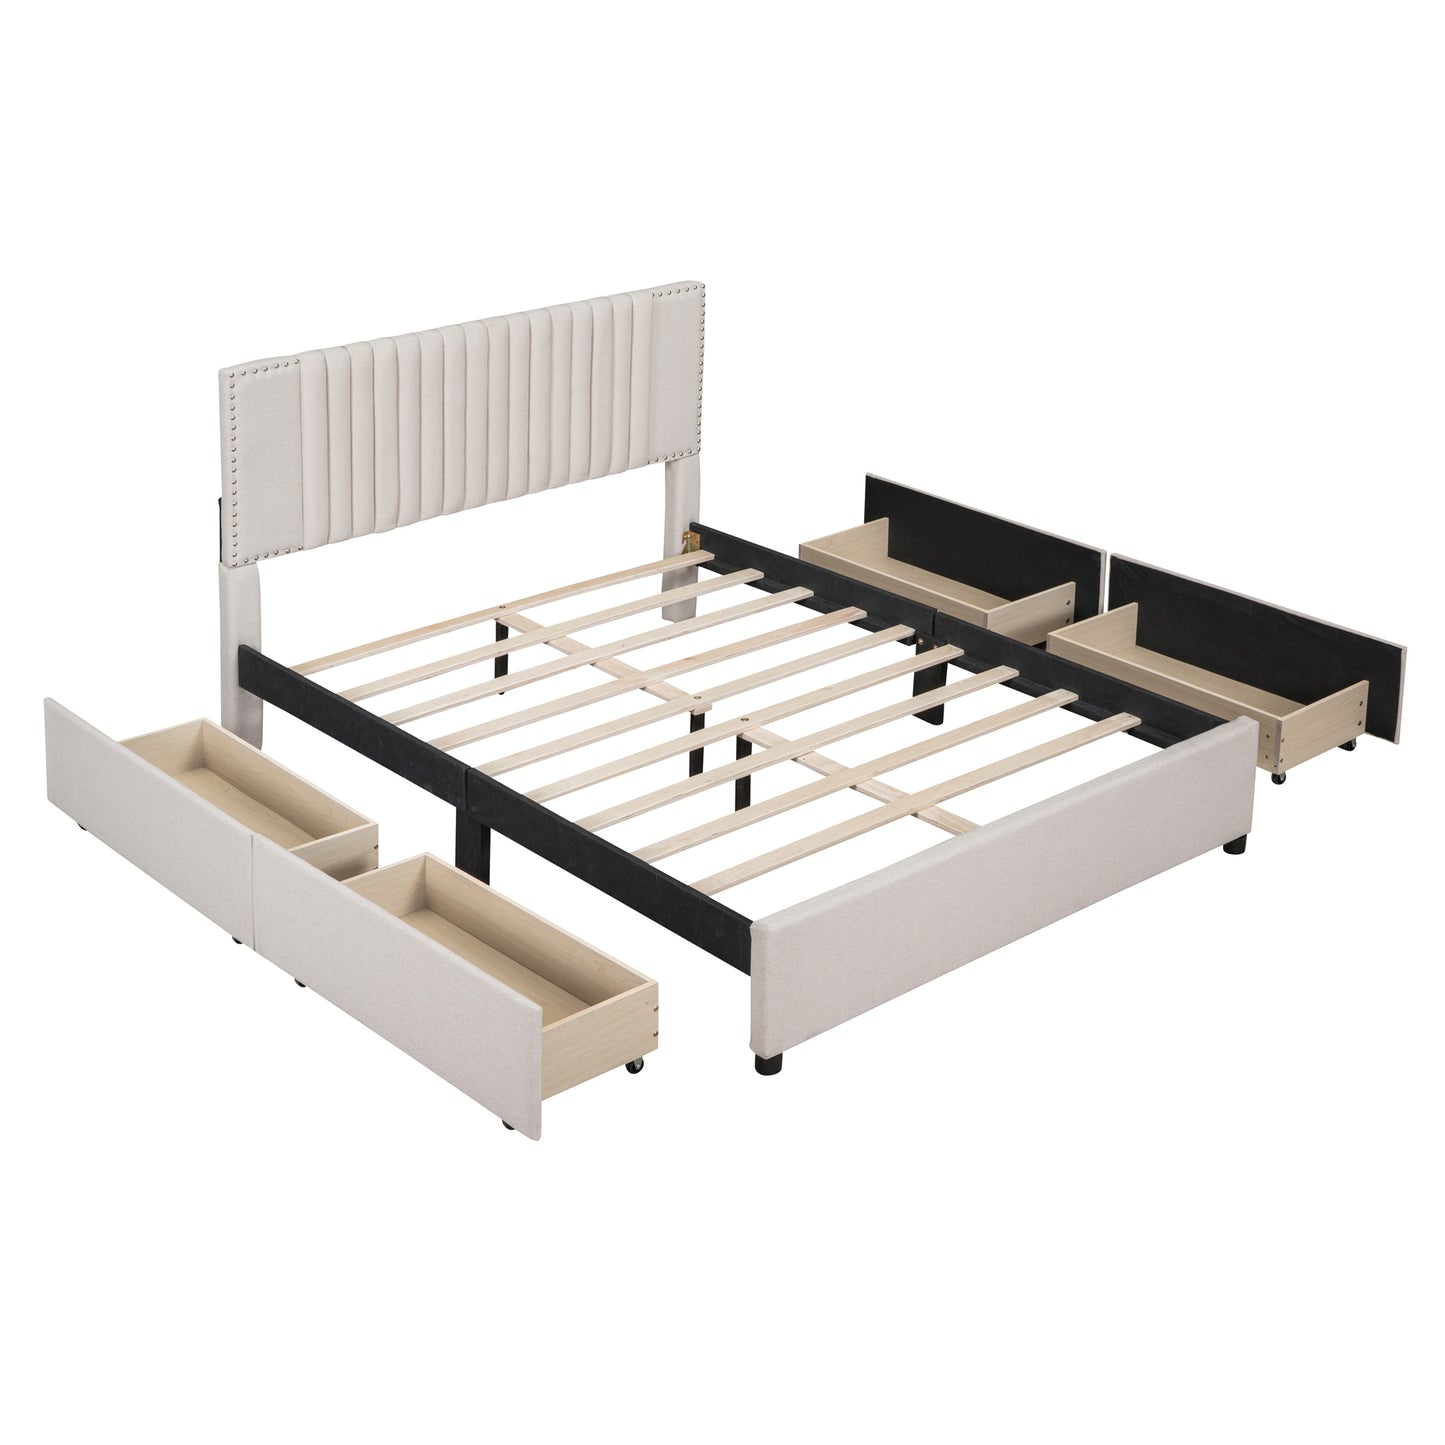 Queen Size Upholstered Platform Bed with Classic Headboard and 4 Drawers, Linen Fabric, Beige